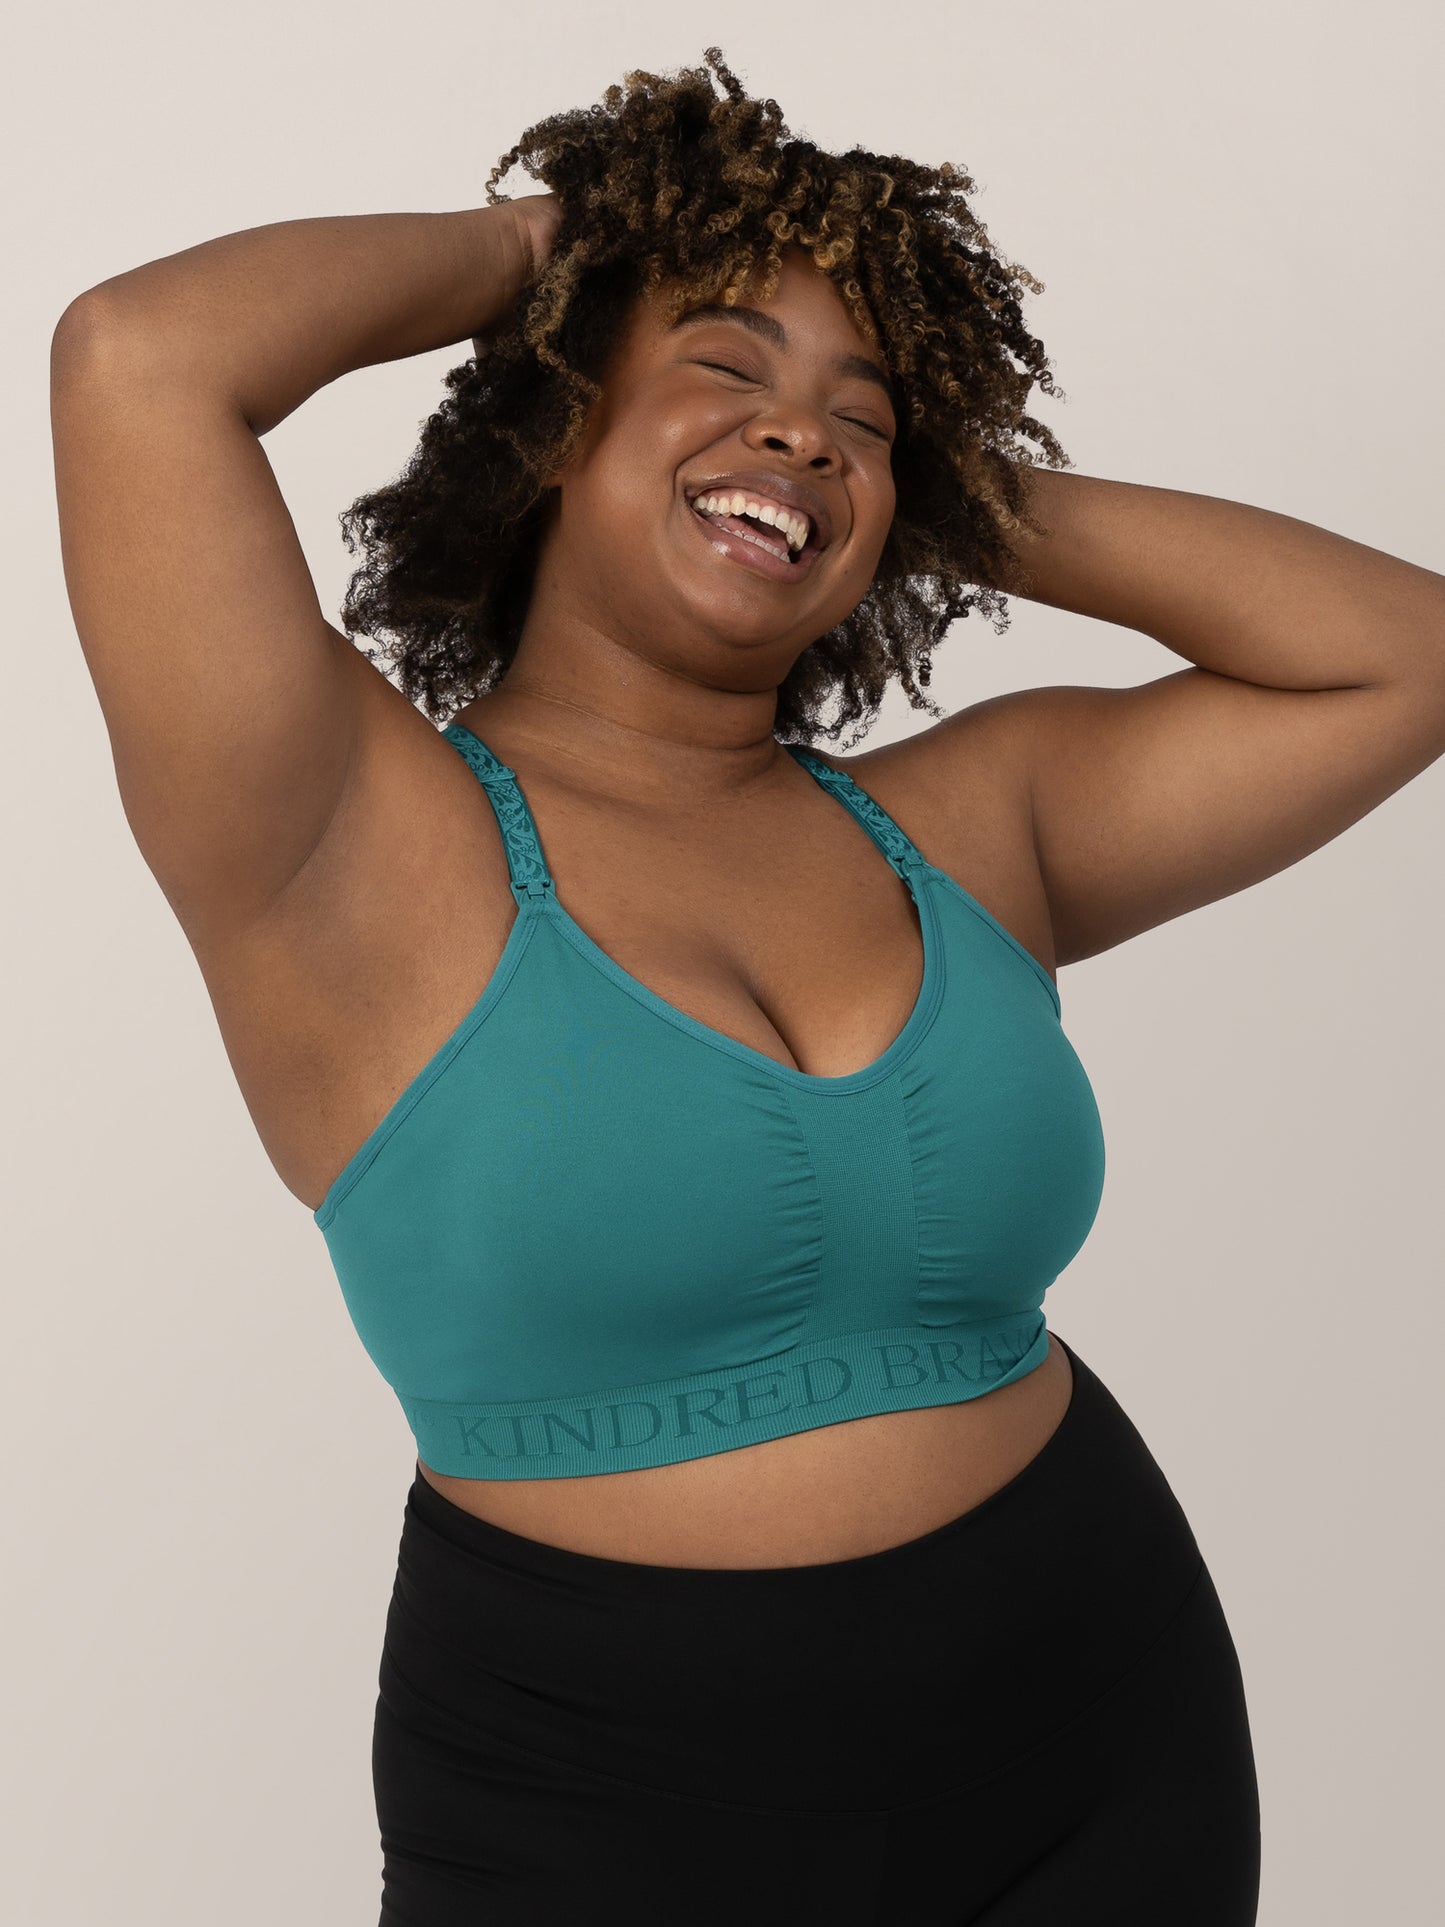 Kindred Bravely Sublime® Hands-Free Pumping & Nursing Sports Bra - Bla –  The Wild